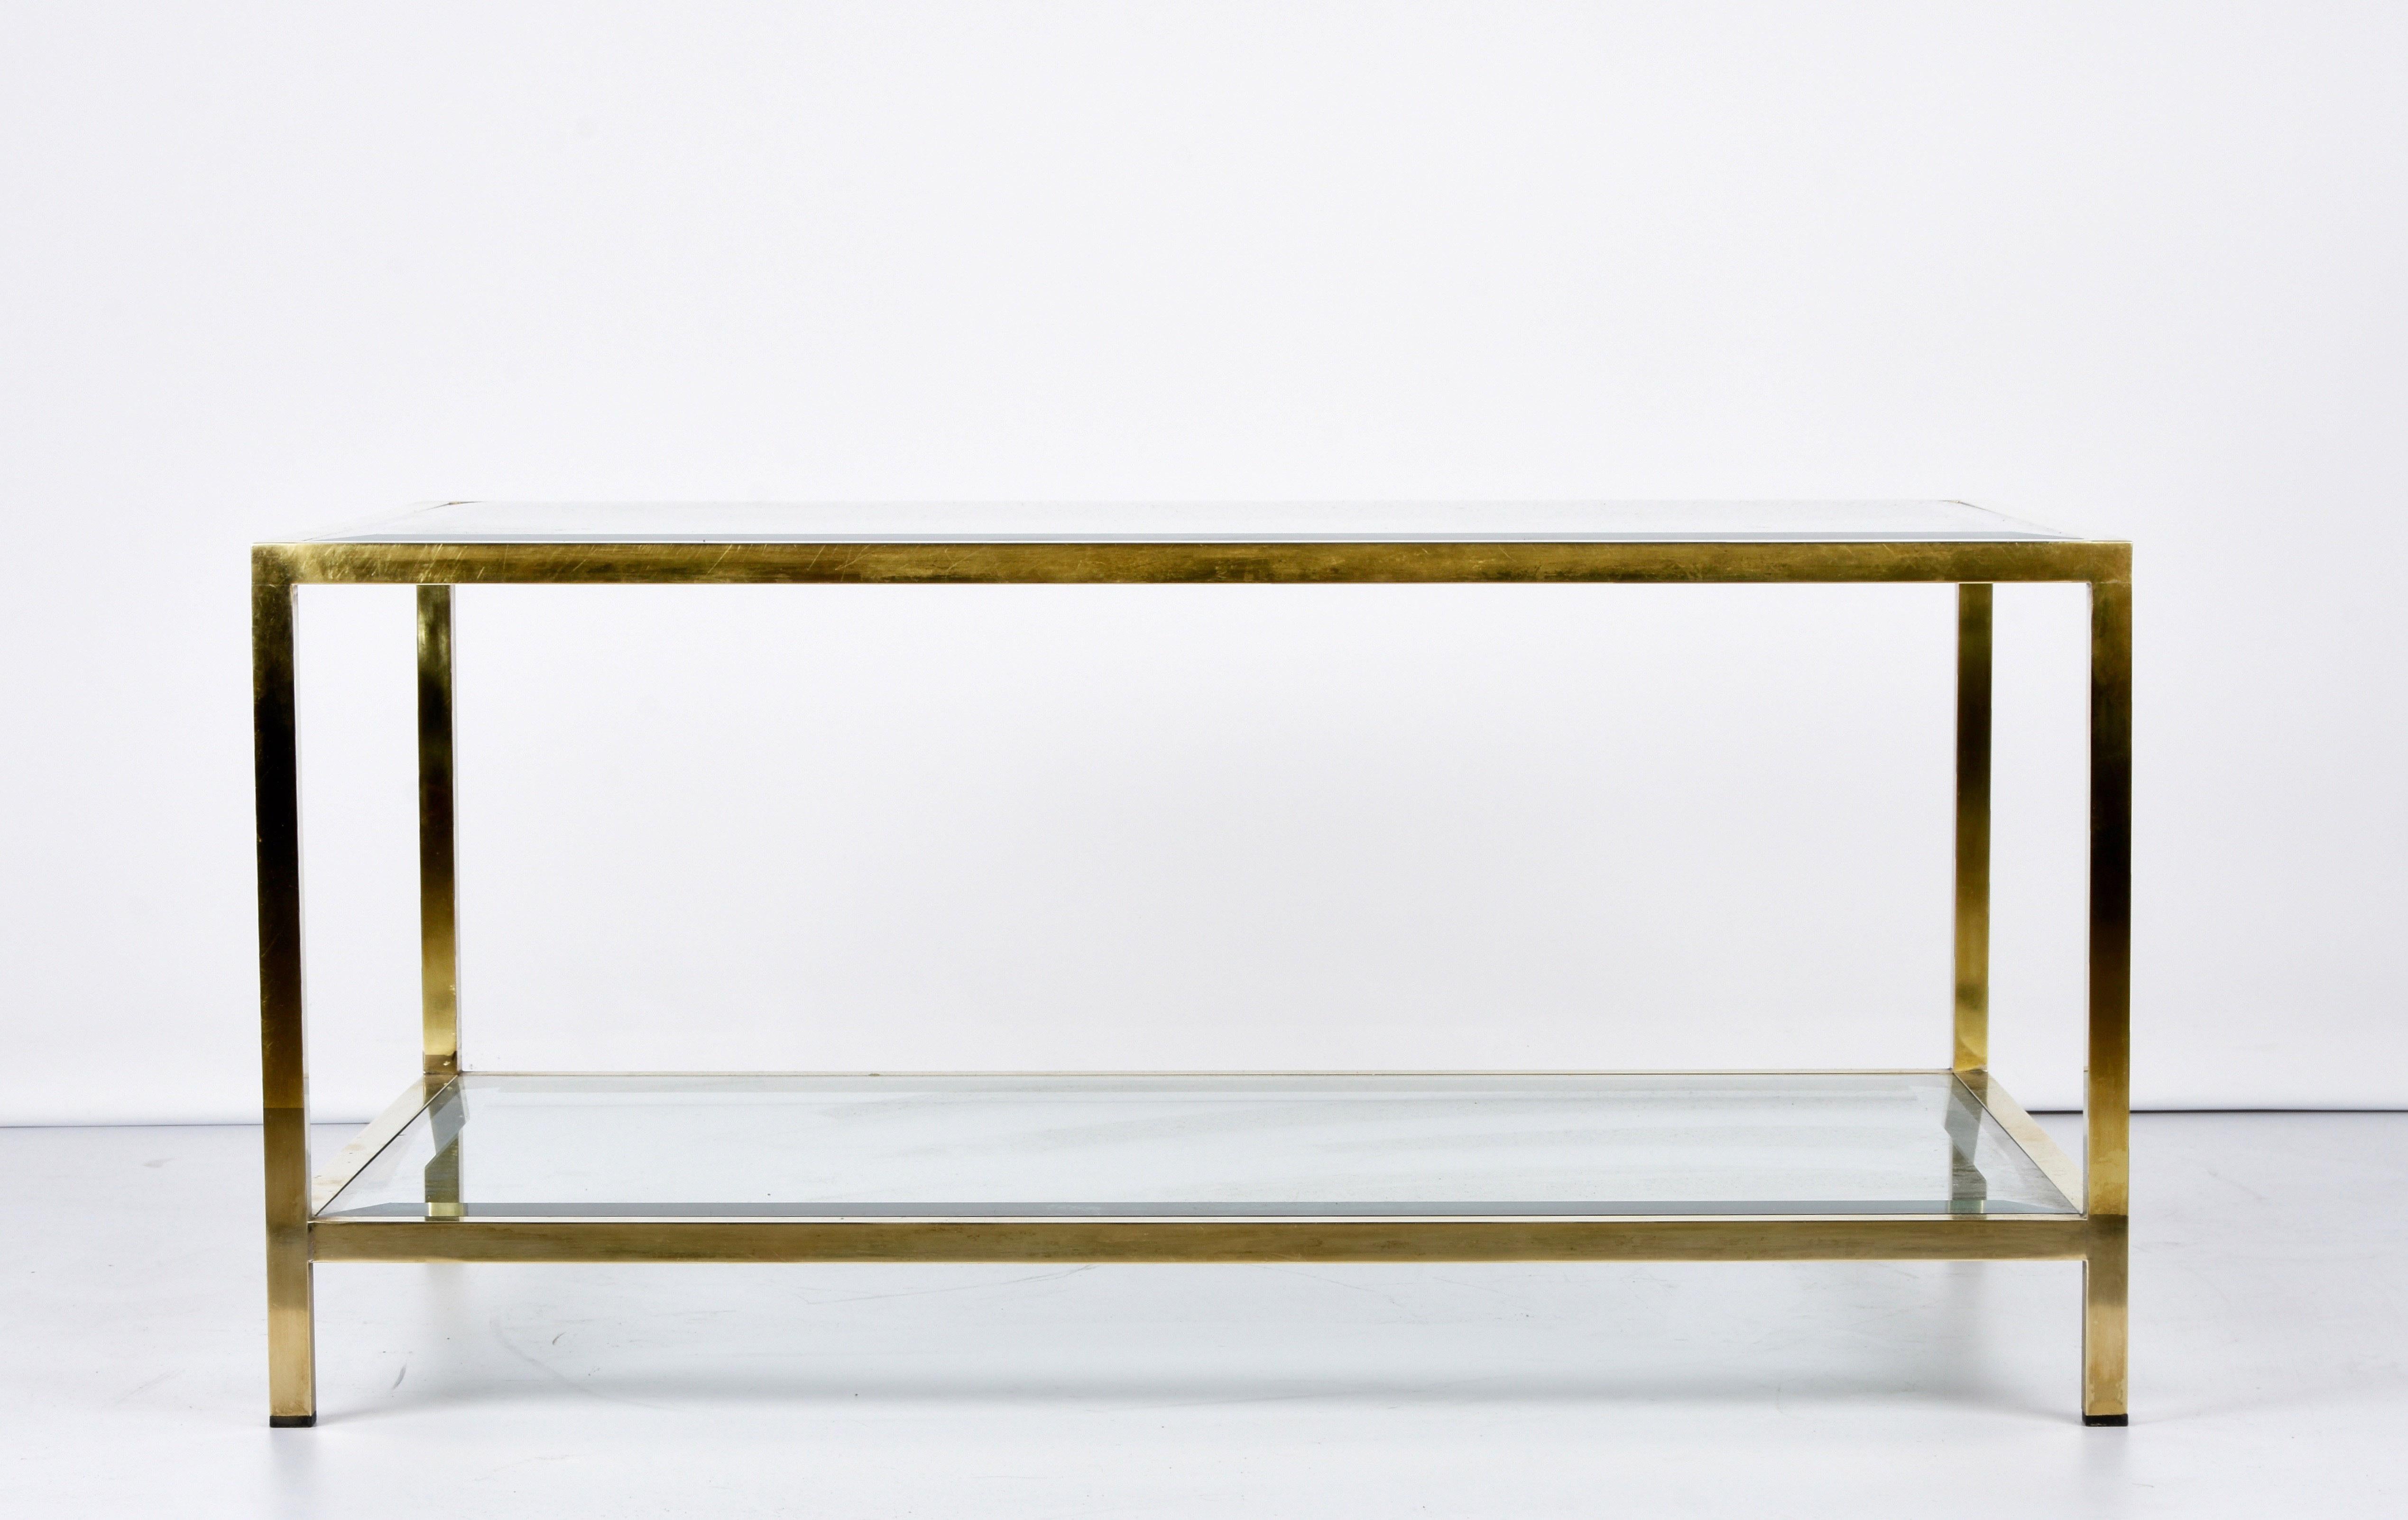 MidCentury Brass and Glass Italian Double-Tiered Rectangular Coffee Table, 1970s For Sale 2